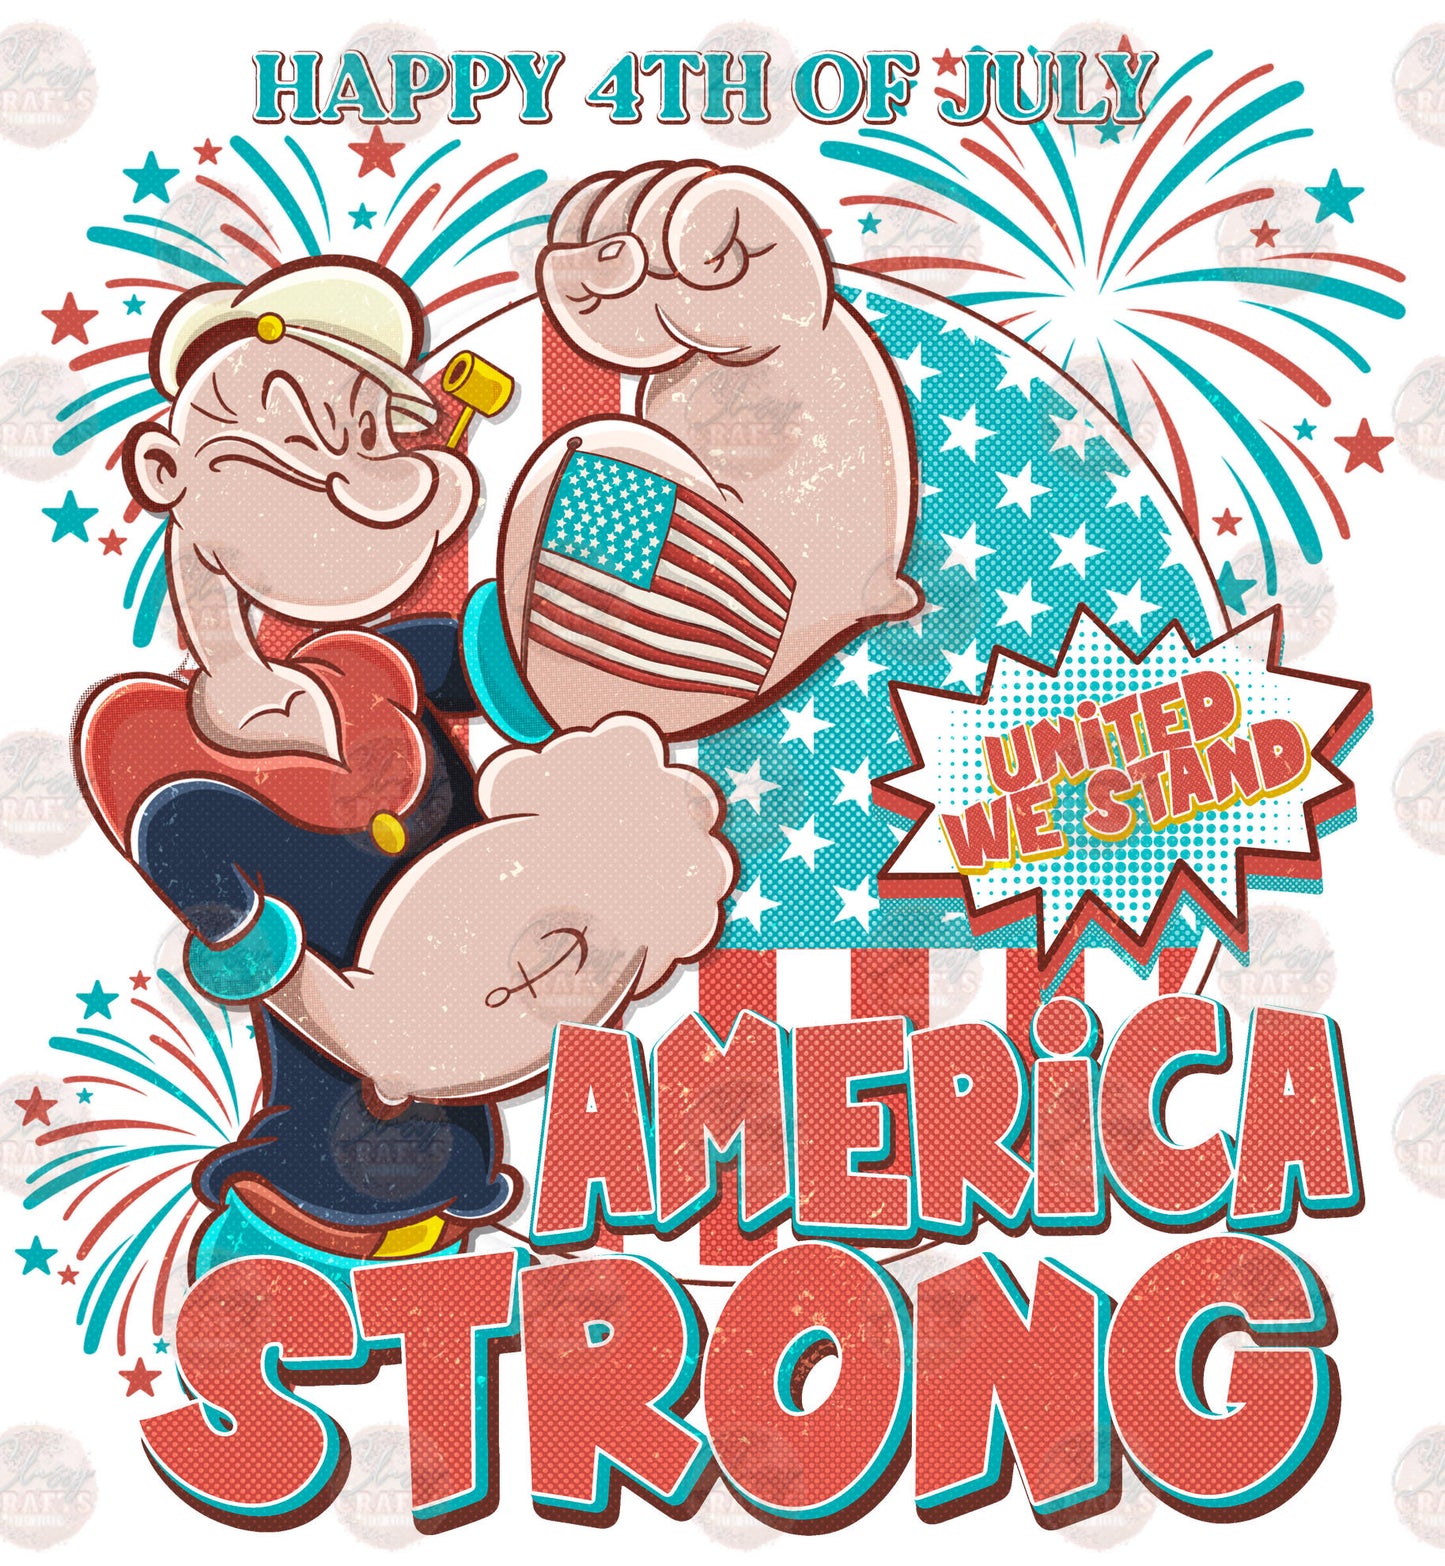 America Strong, Happy 4th **TWO PART* SOLD SEPARATELY** Transfer